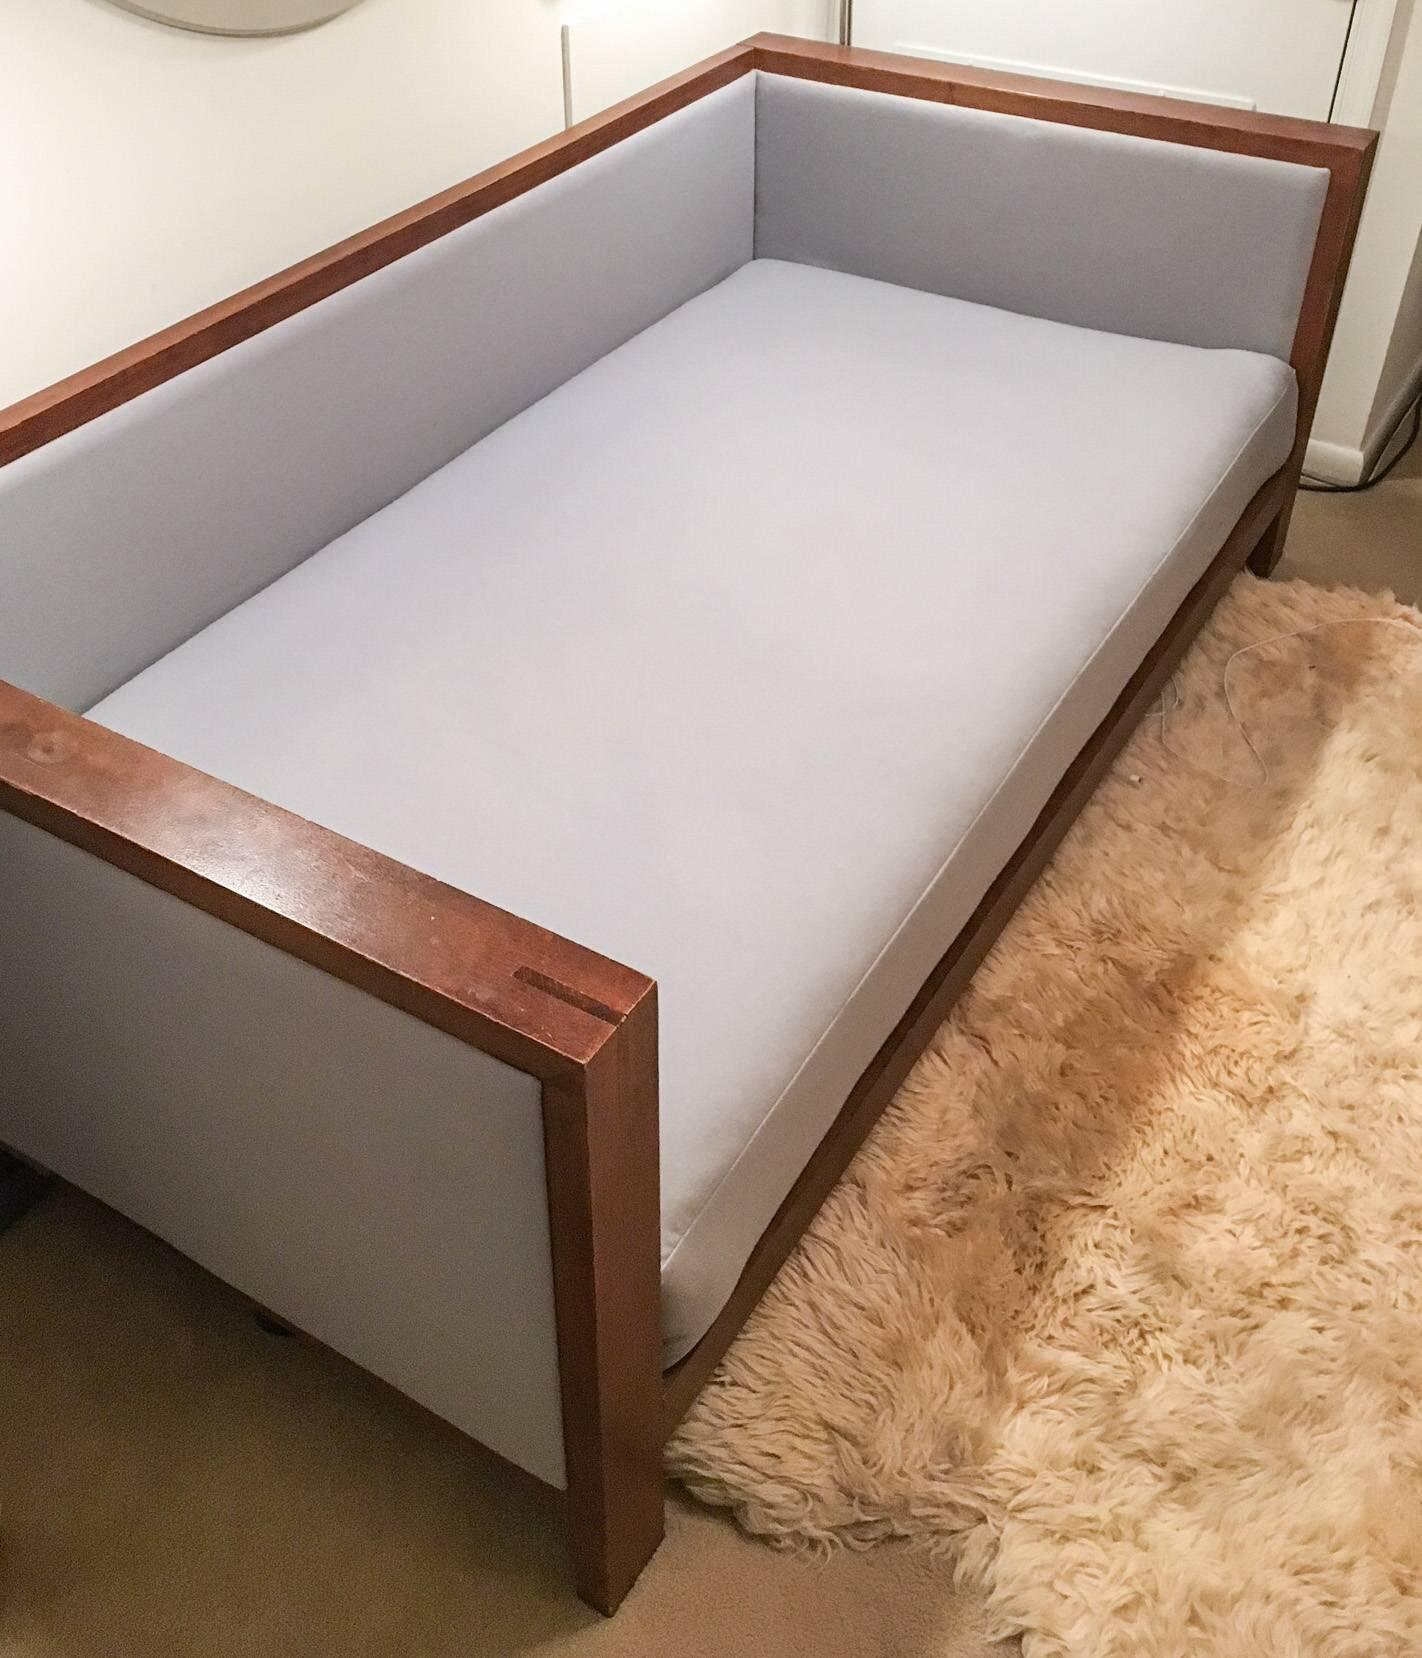 Excellent midcentury style wood frame daybed with new pale blue Hodsoll McKenzie wool billiard cloth upholstery. The cushion is a new twin-sized mattress wrapped in Dacron with a zipper along the back. Back of sofa daybed is has an upholstered panel